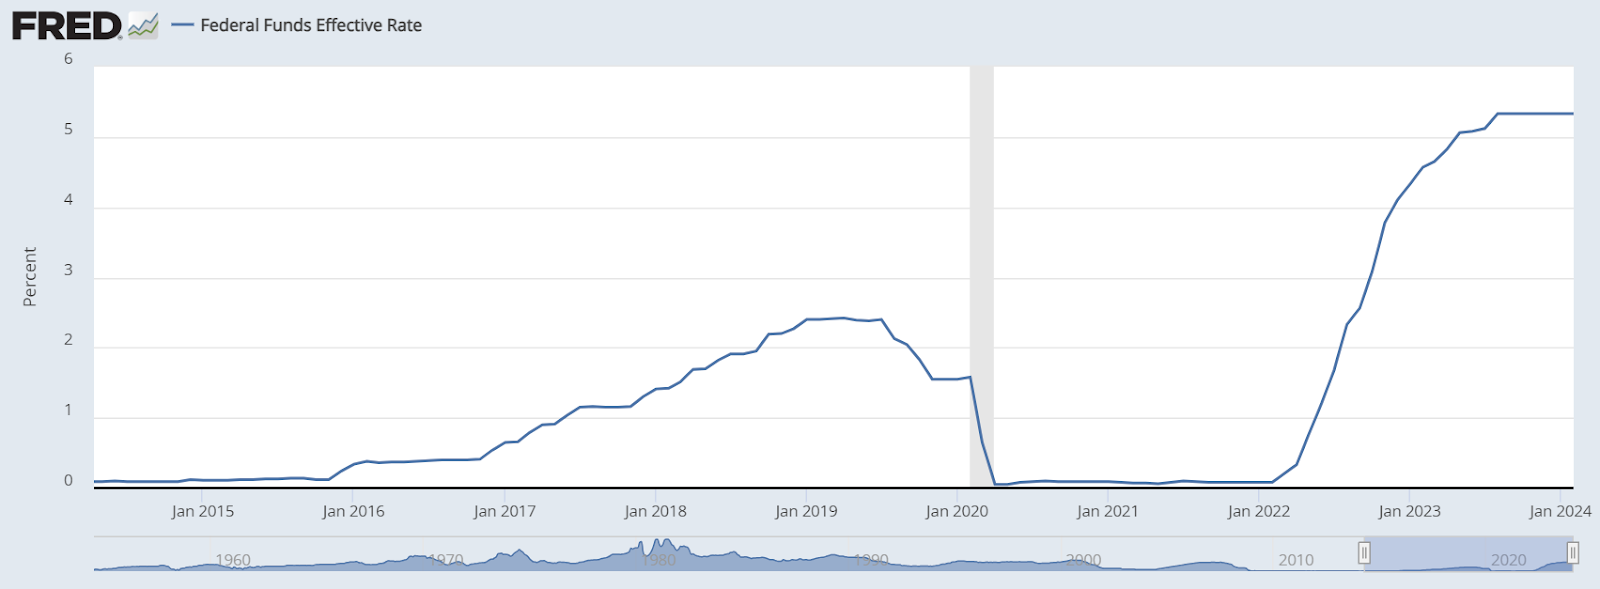 US Fed Funds Rate from 2014 to 2024